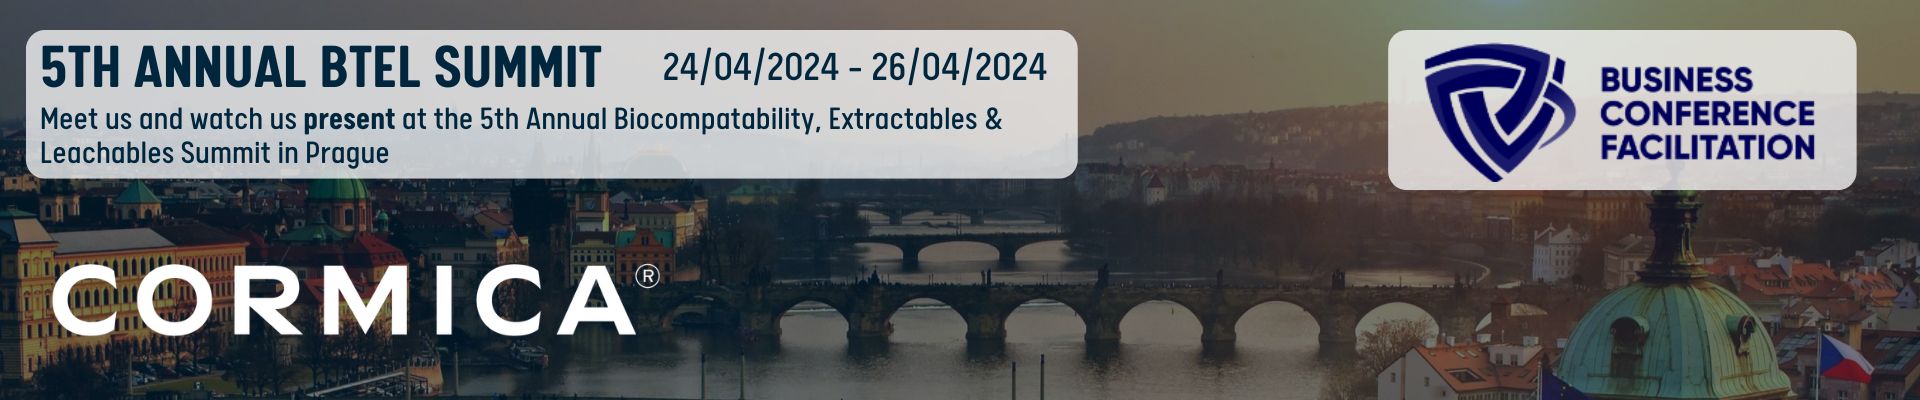 Background of Prague, Text overlay reads: "5TH ANNUAL BTEL SUMMIT 24/04/2024-26/04/2024 BUSINESS CONFERENCE FACILITATION. Meet us and watch us present at the 5th Annual Biocompatability, Extractables & Leachables Summit in Prague. Cormica logo also included.